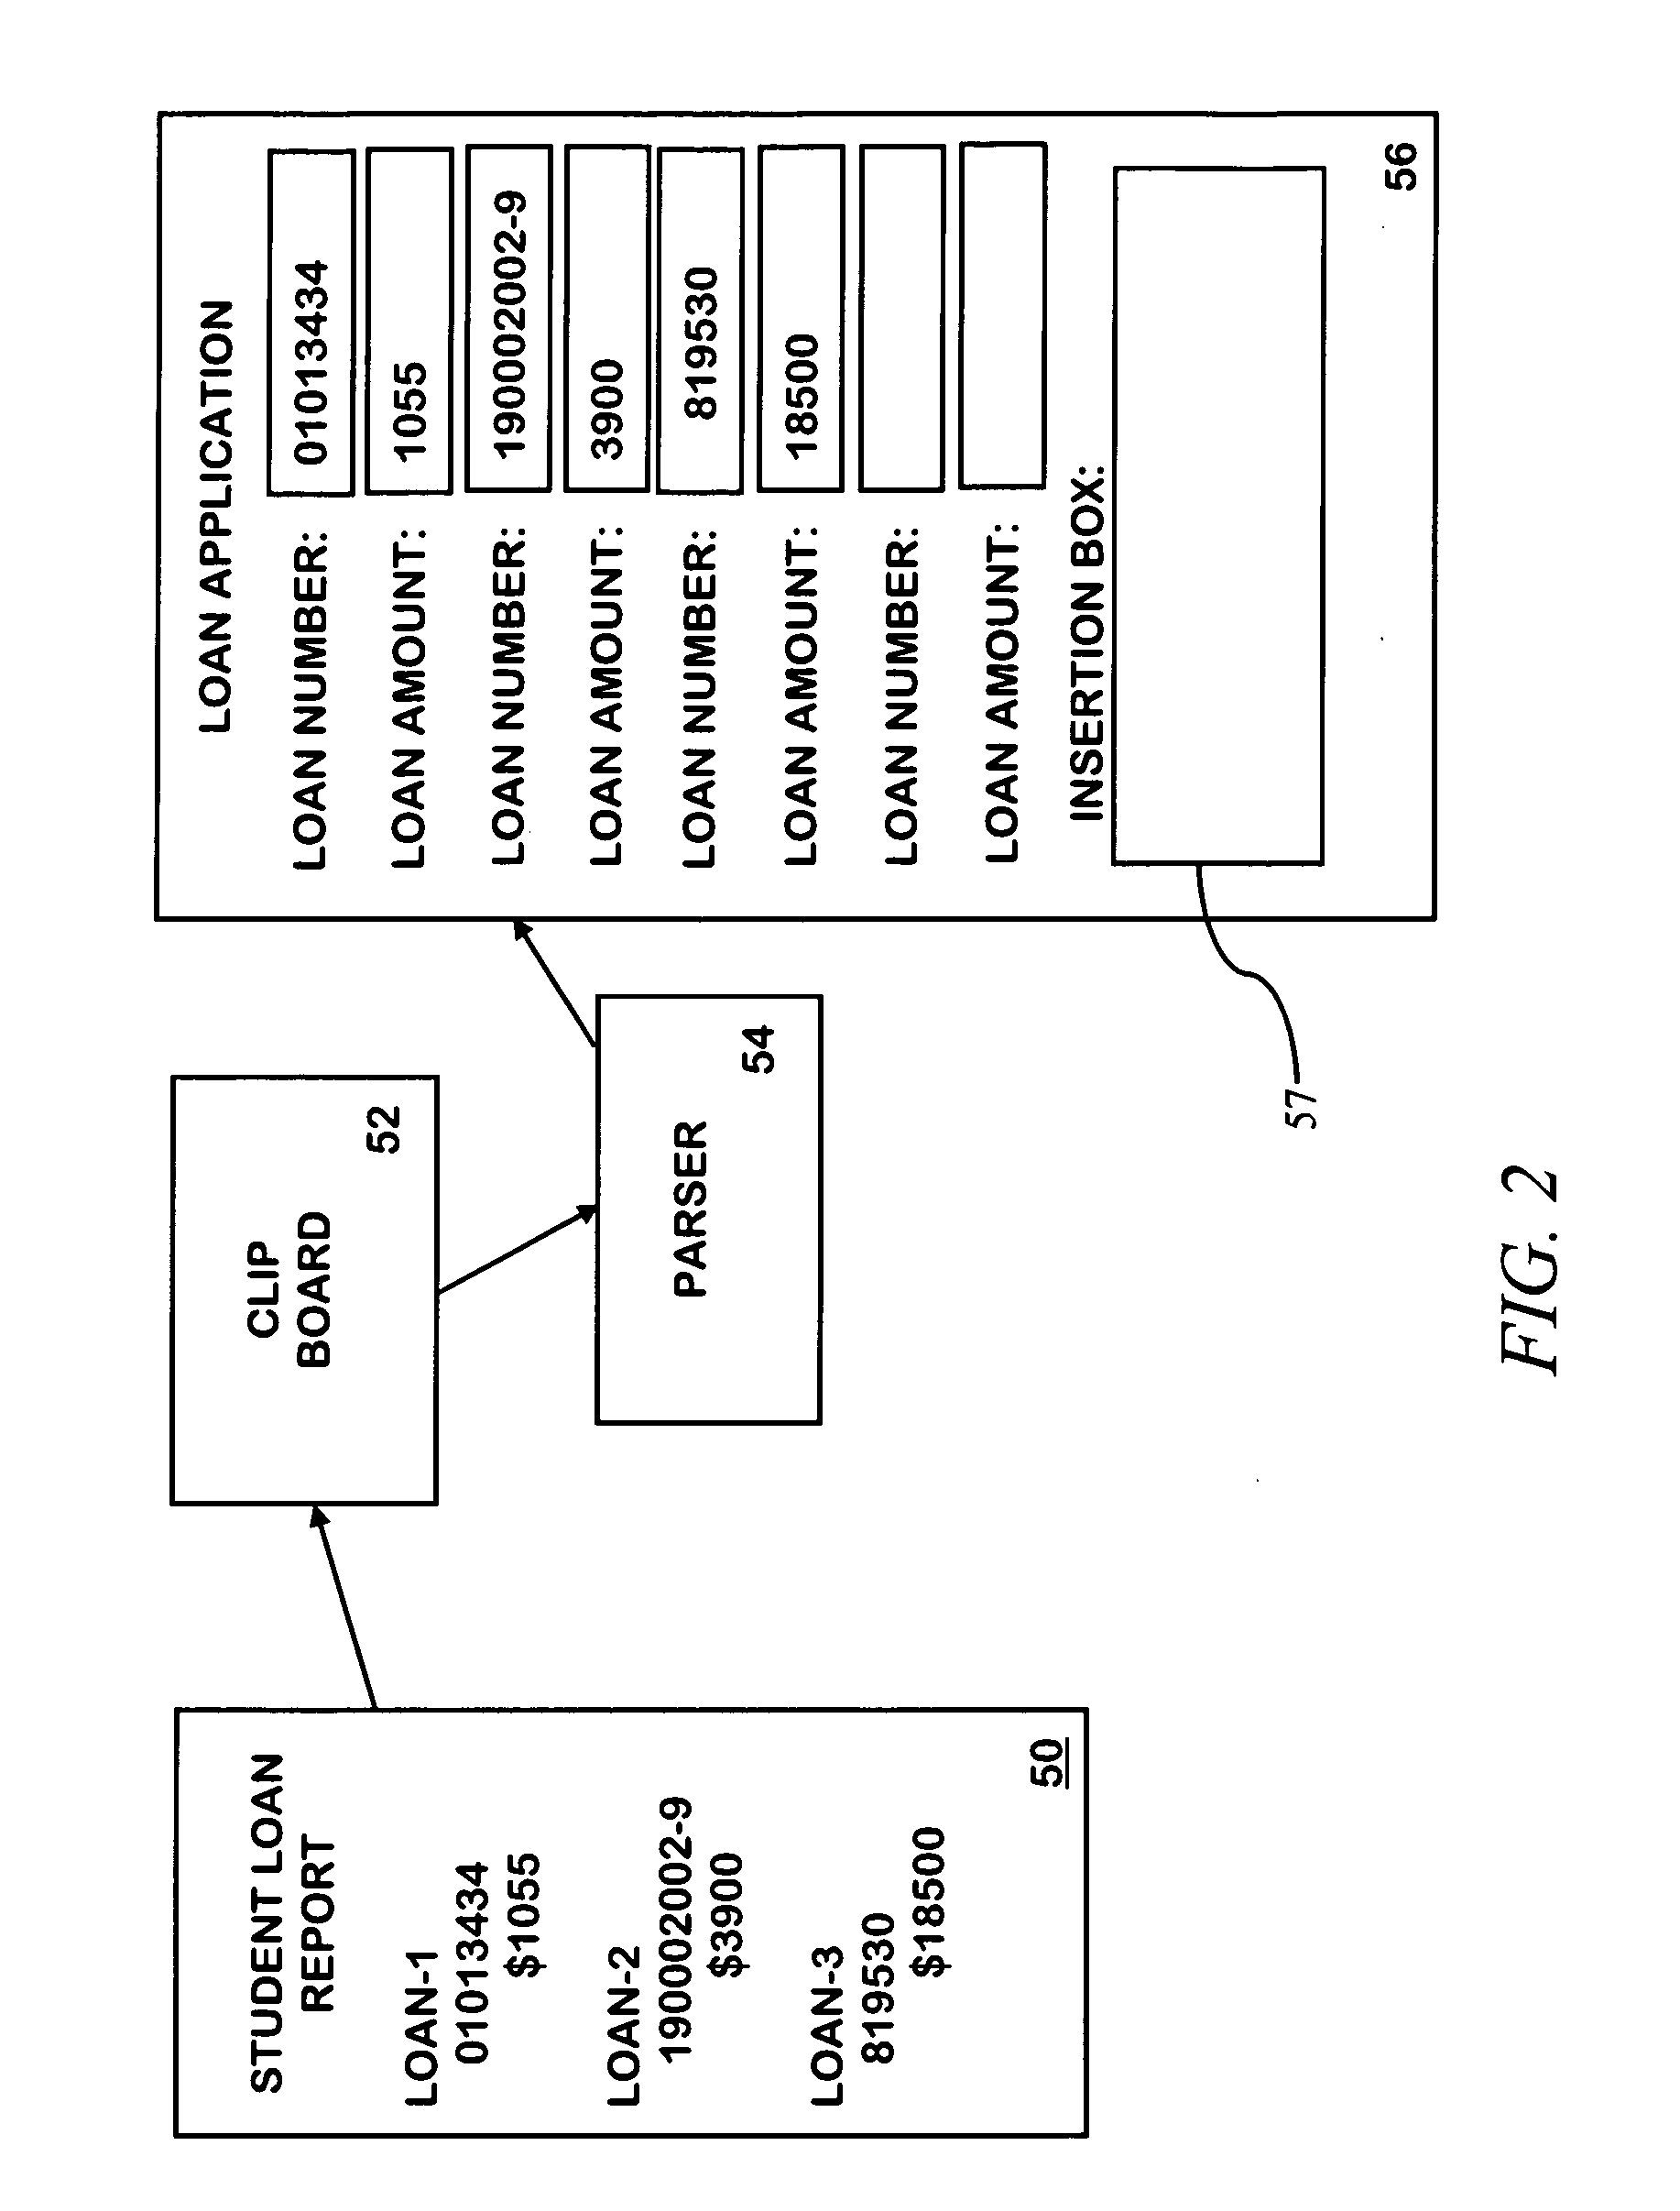 System, method and apparatus for multiple field pasting